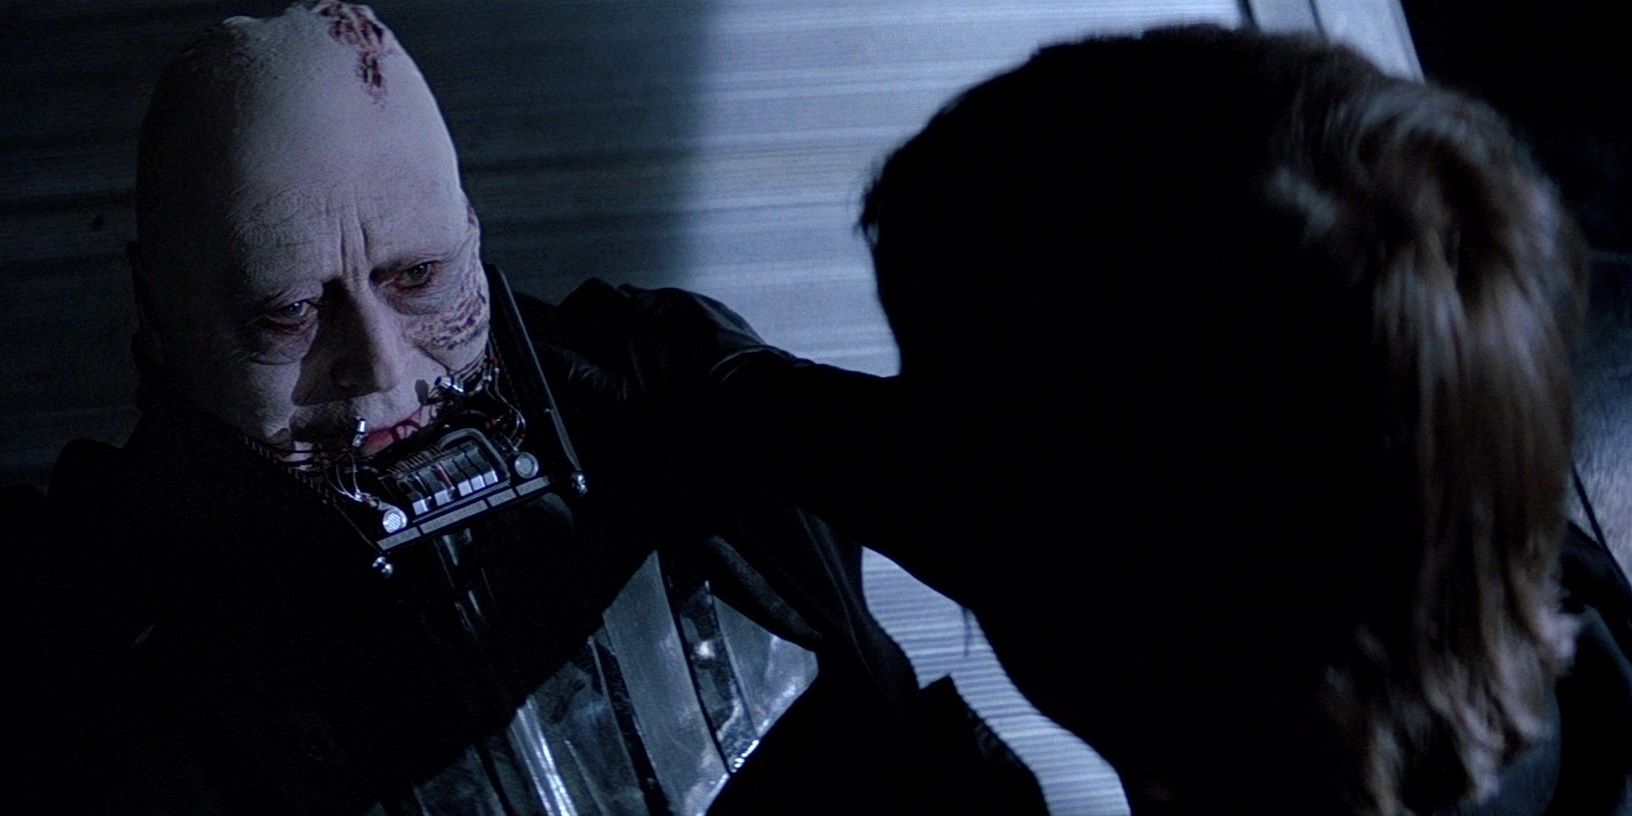 Vader's death in Return of the Jedi